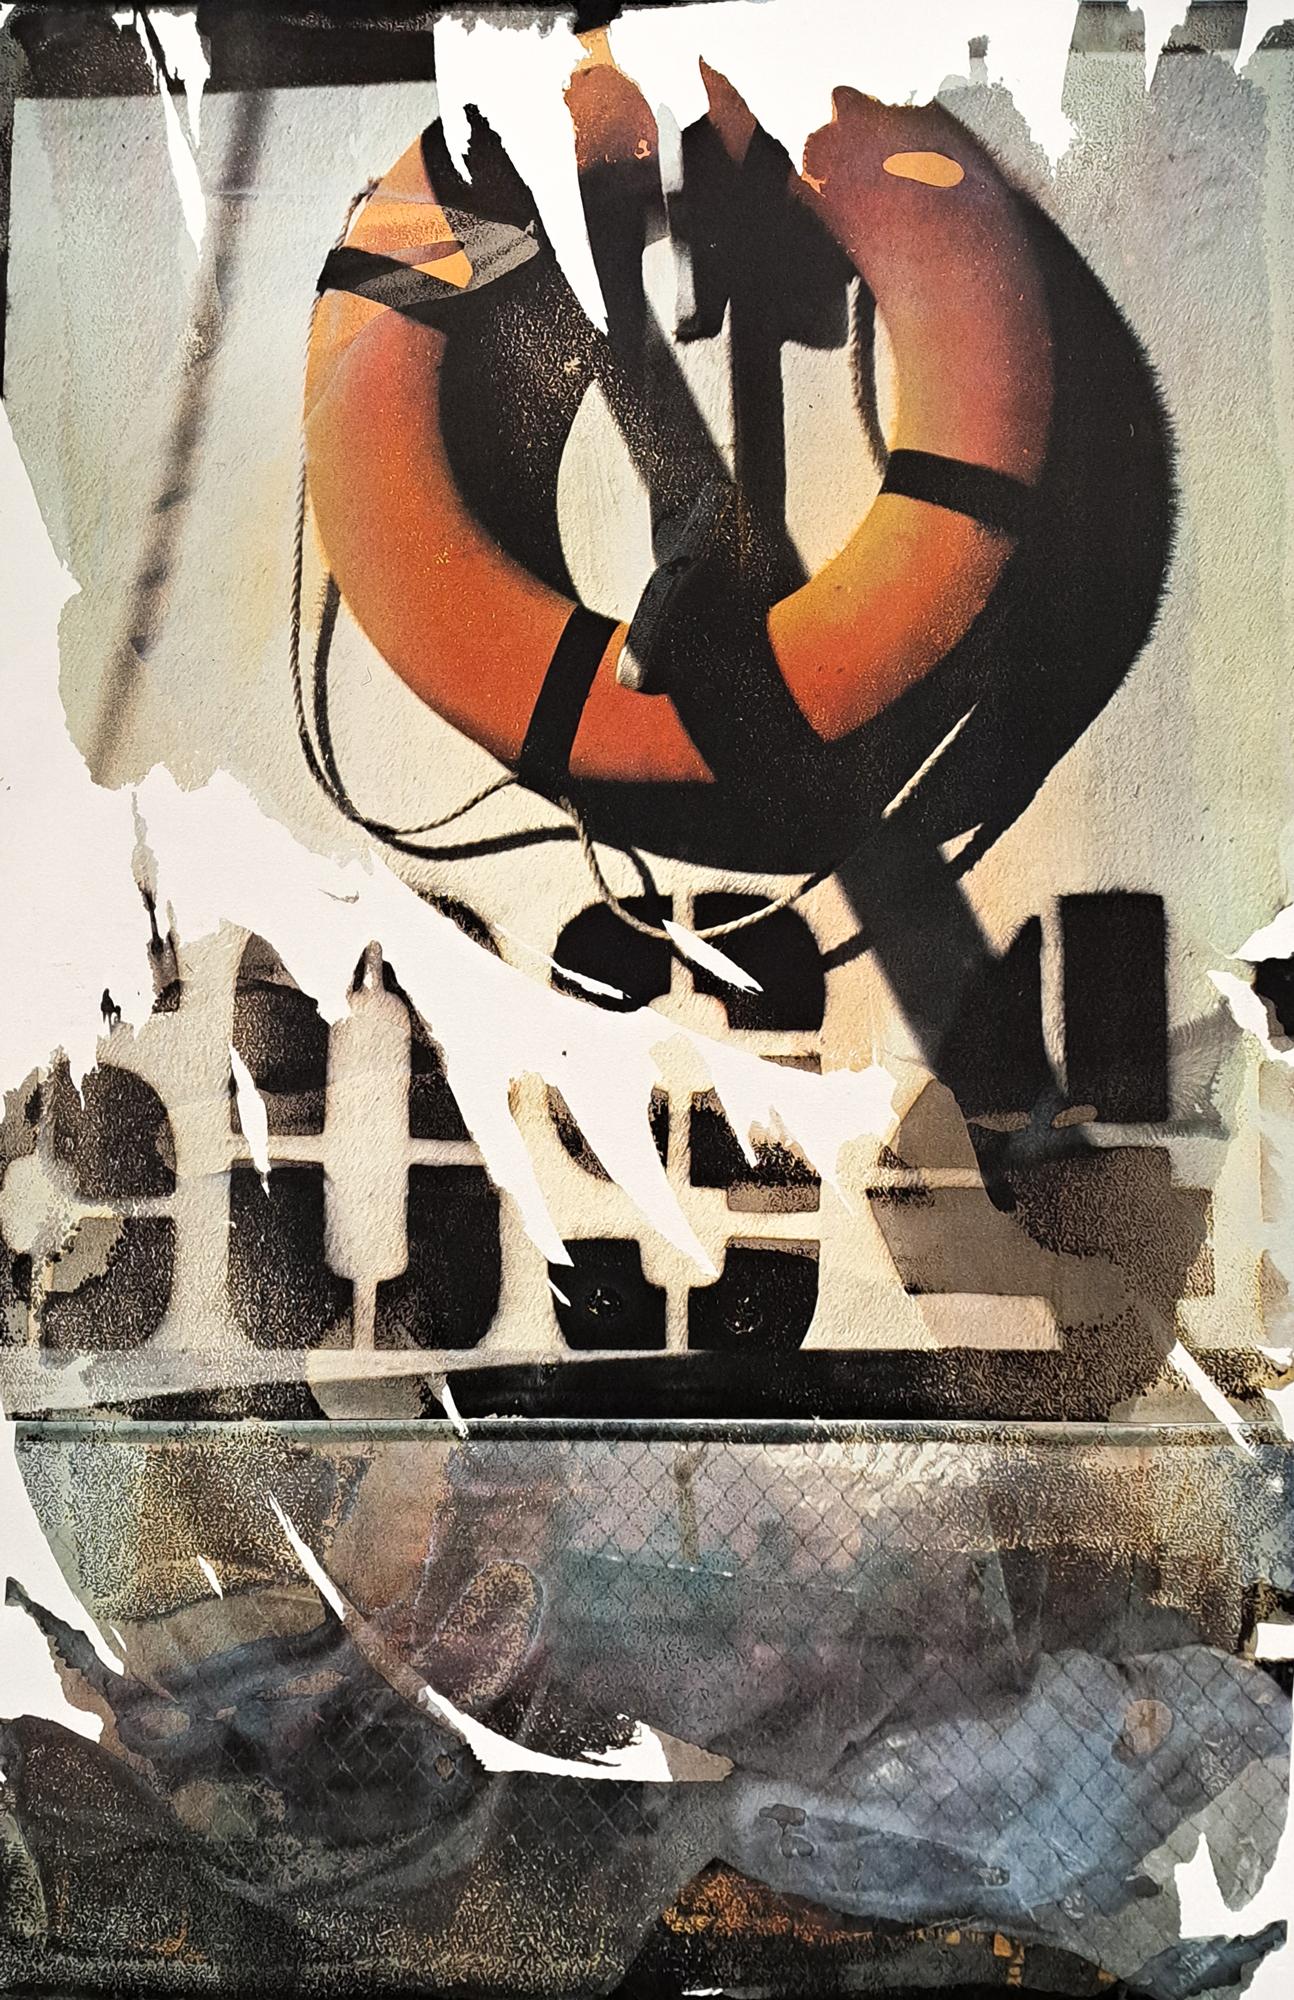 Health (from Tribute 21) - Print by Robert Rauschenberg